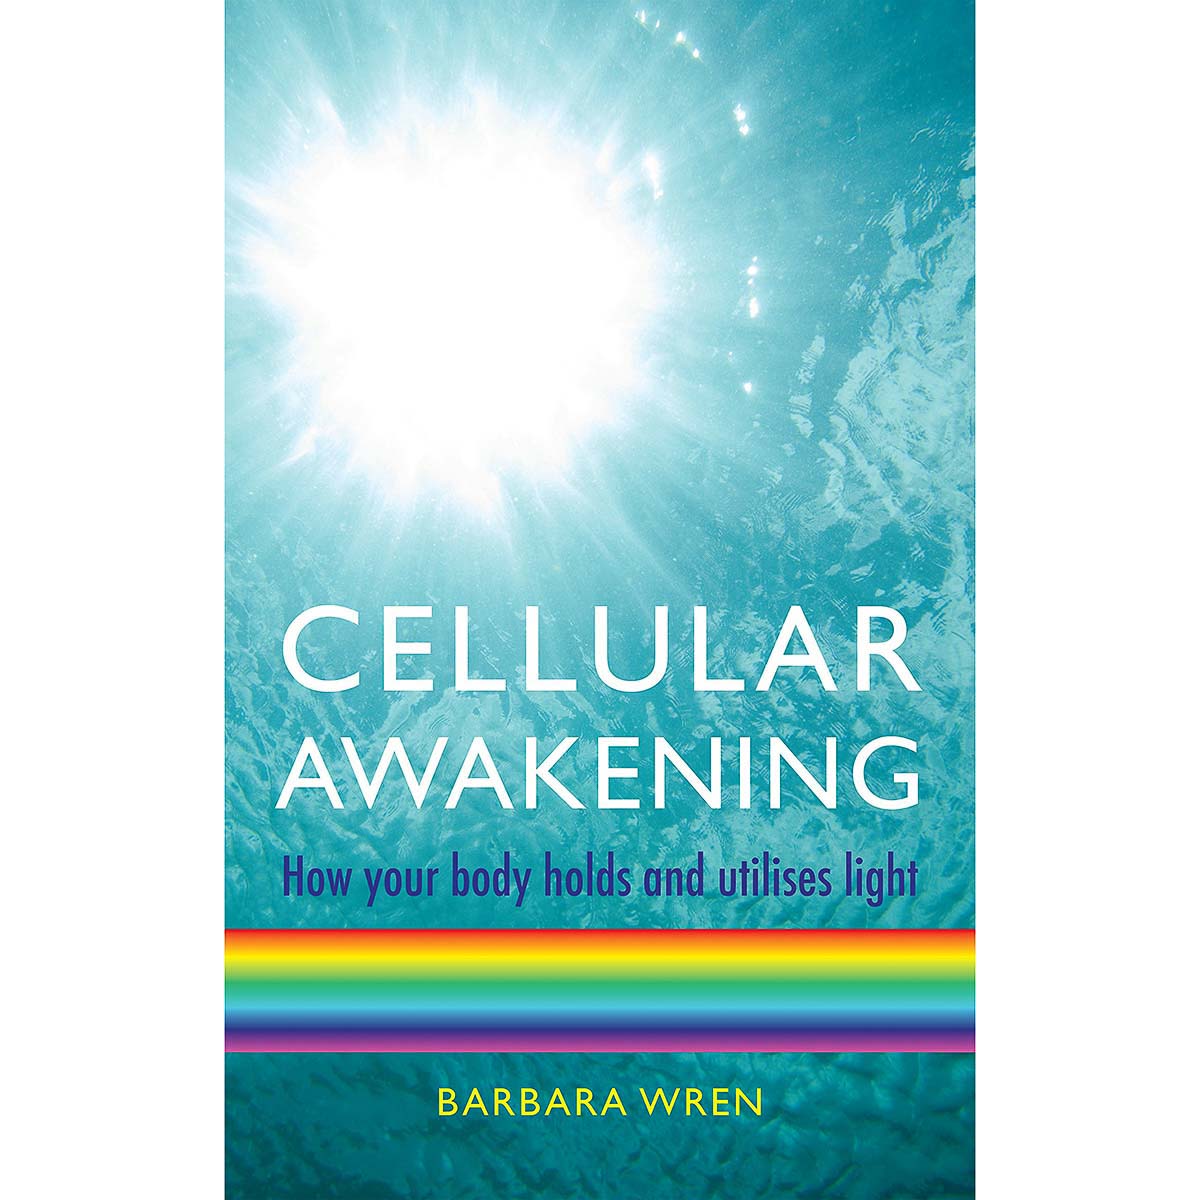 Cellular Awakening | Barbara Wren | Raw Living UK | Books | Cellular Awakening by Wren empowers us to contact our own inner wisdom to heal the body from the inside out. Wren founded of the College of Natural Nutrition.